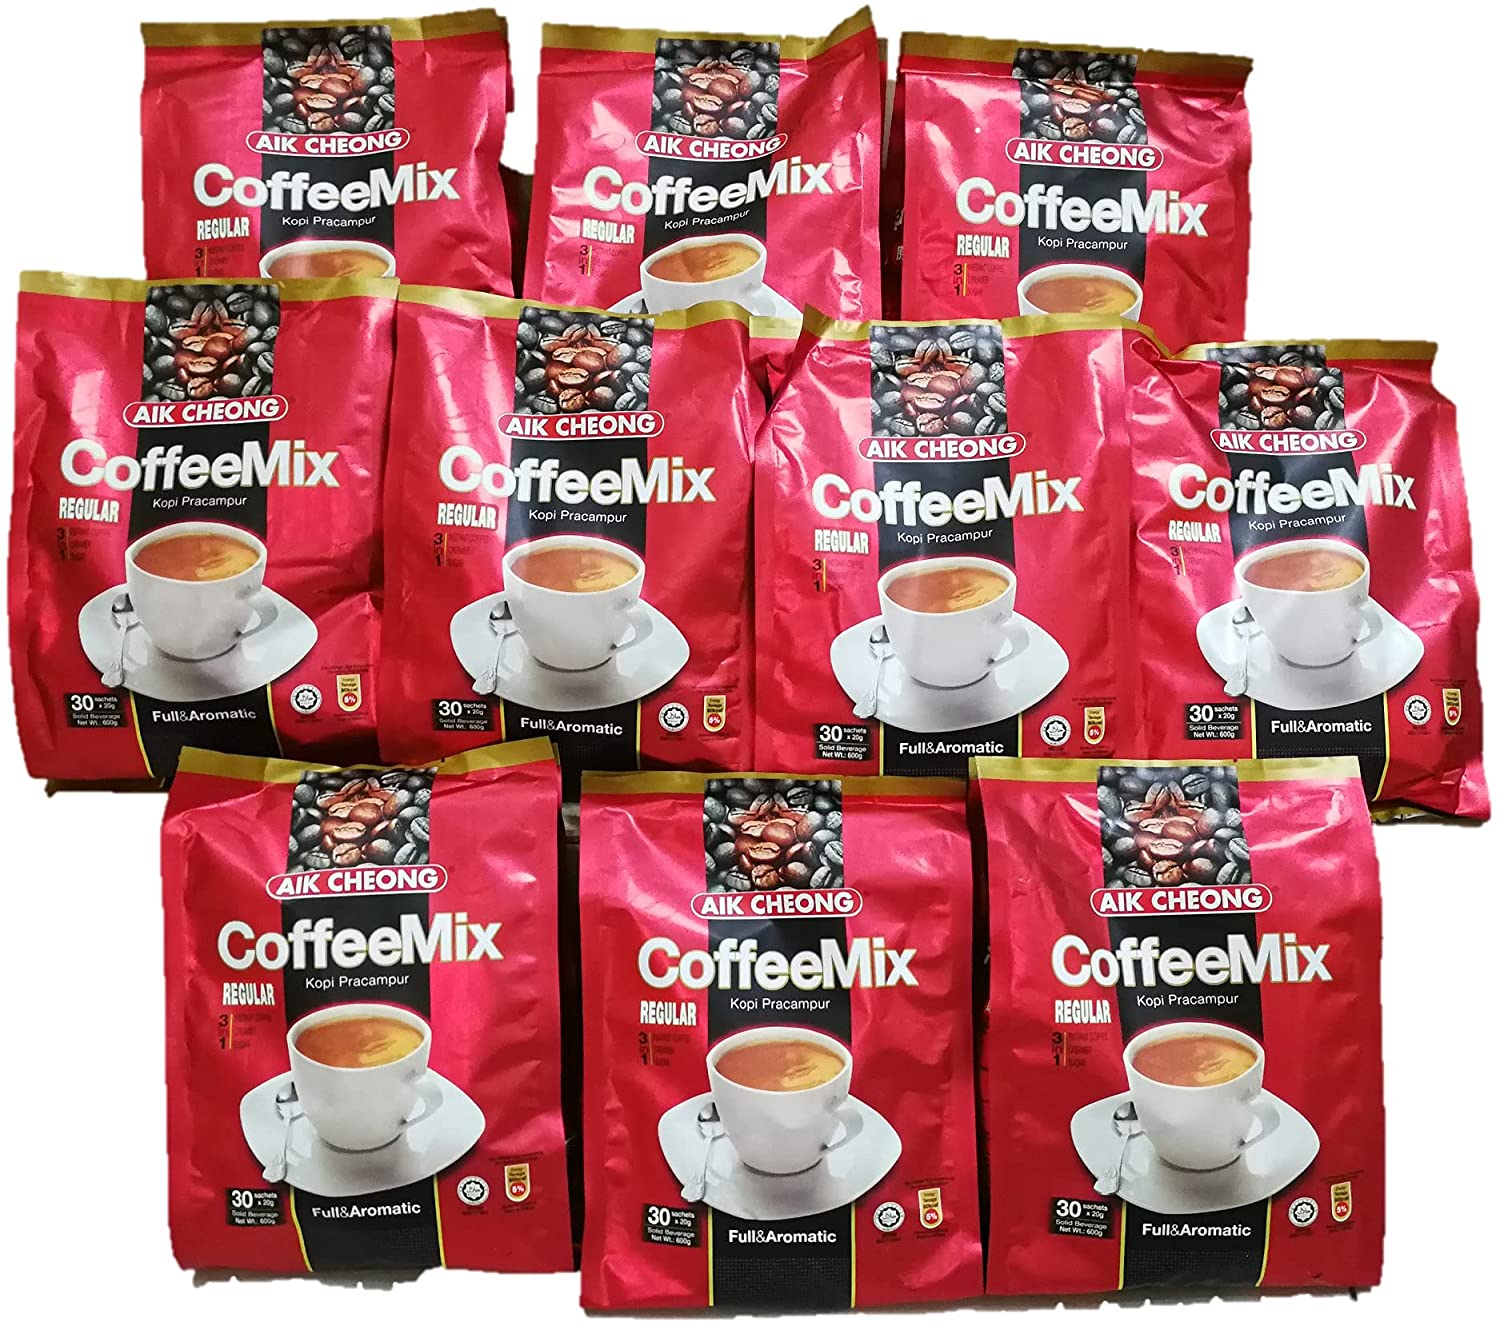 Canderel 3in1 Instant Coffee